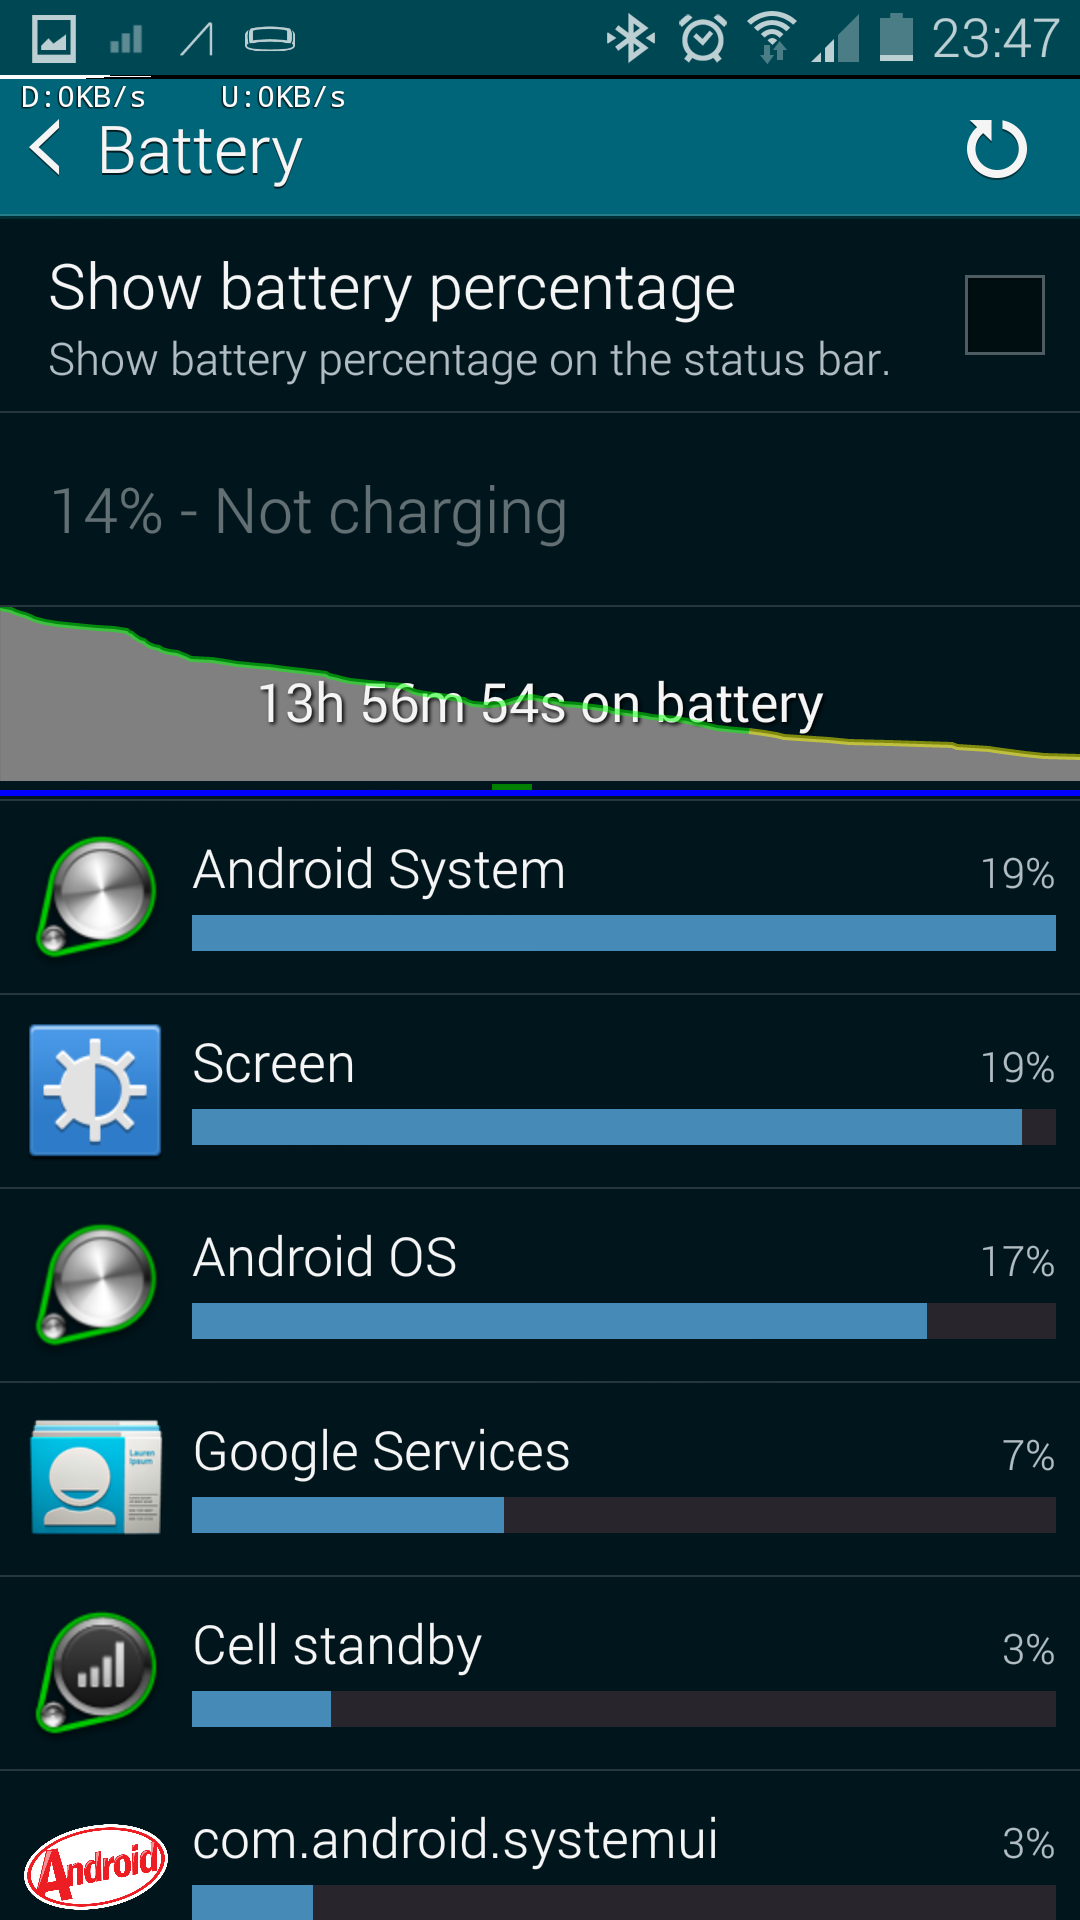 ycp reviews samsung galaxy s5 battery life android battery graph